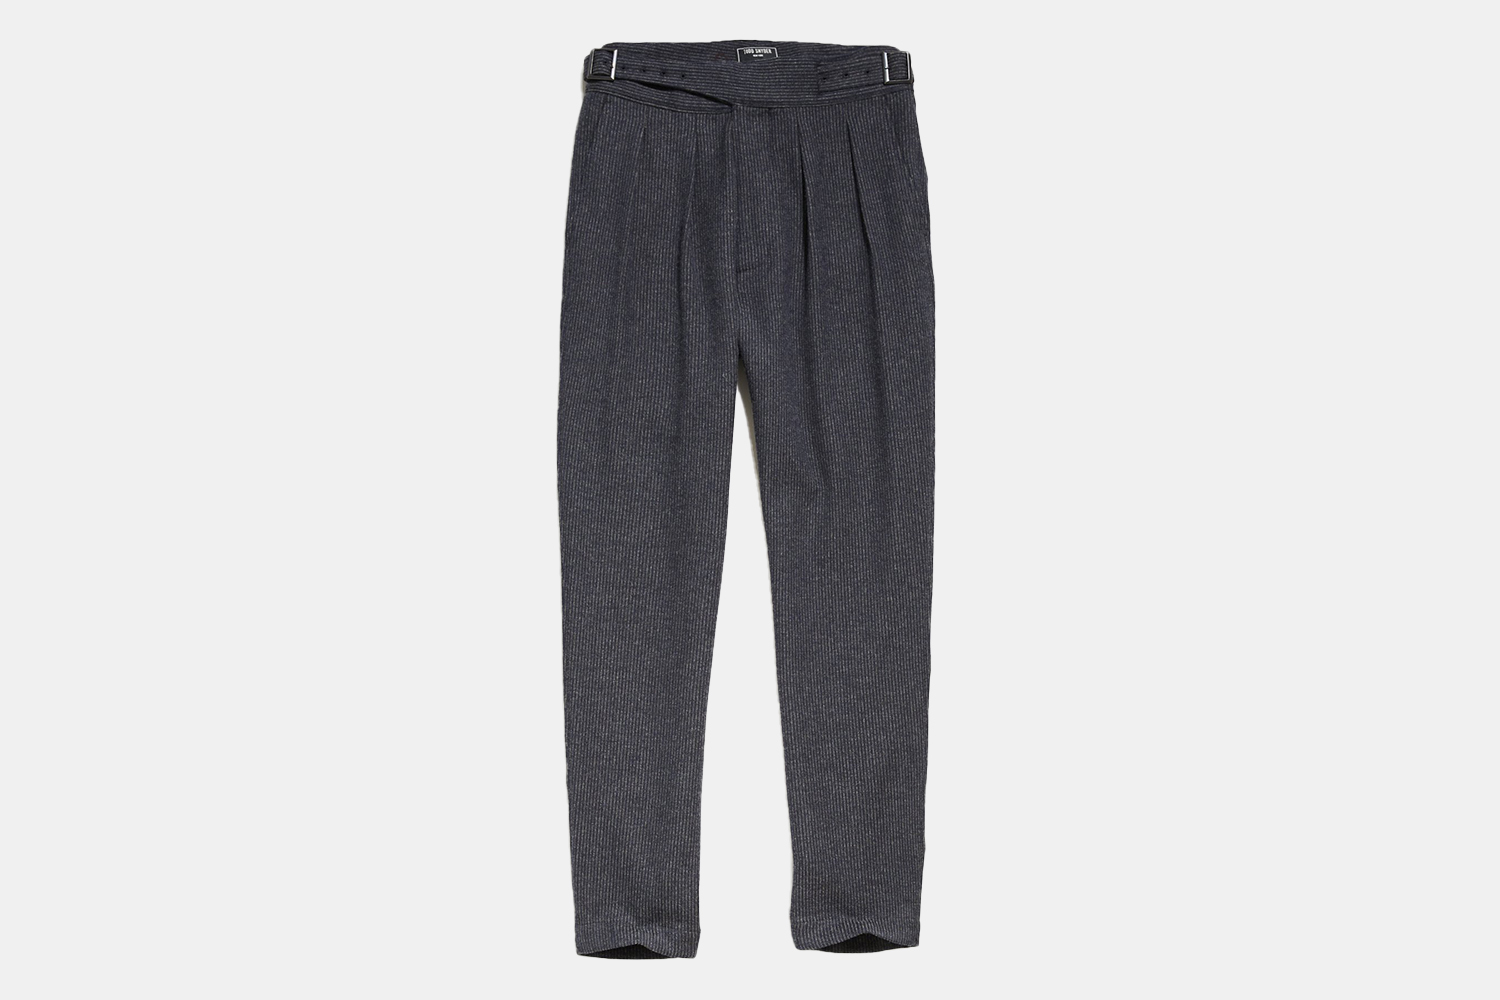 a pair of self-belted, charcoal colored trousers. 